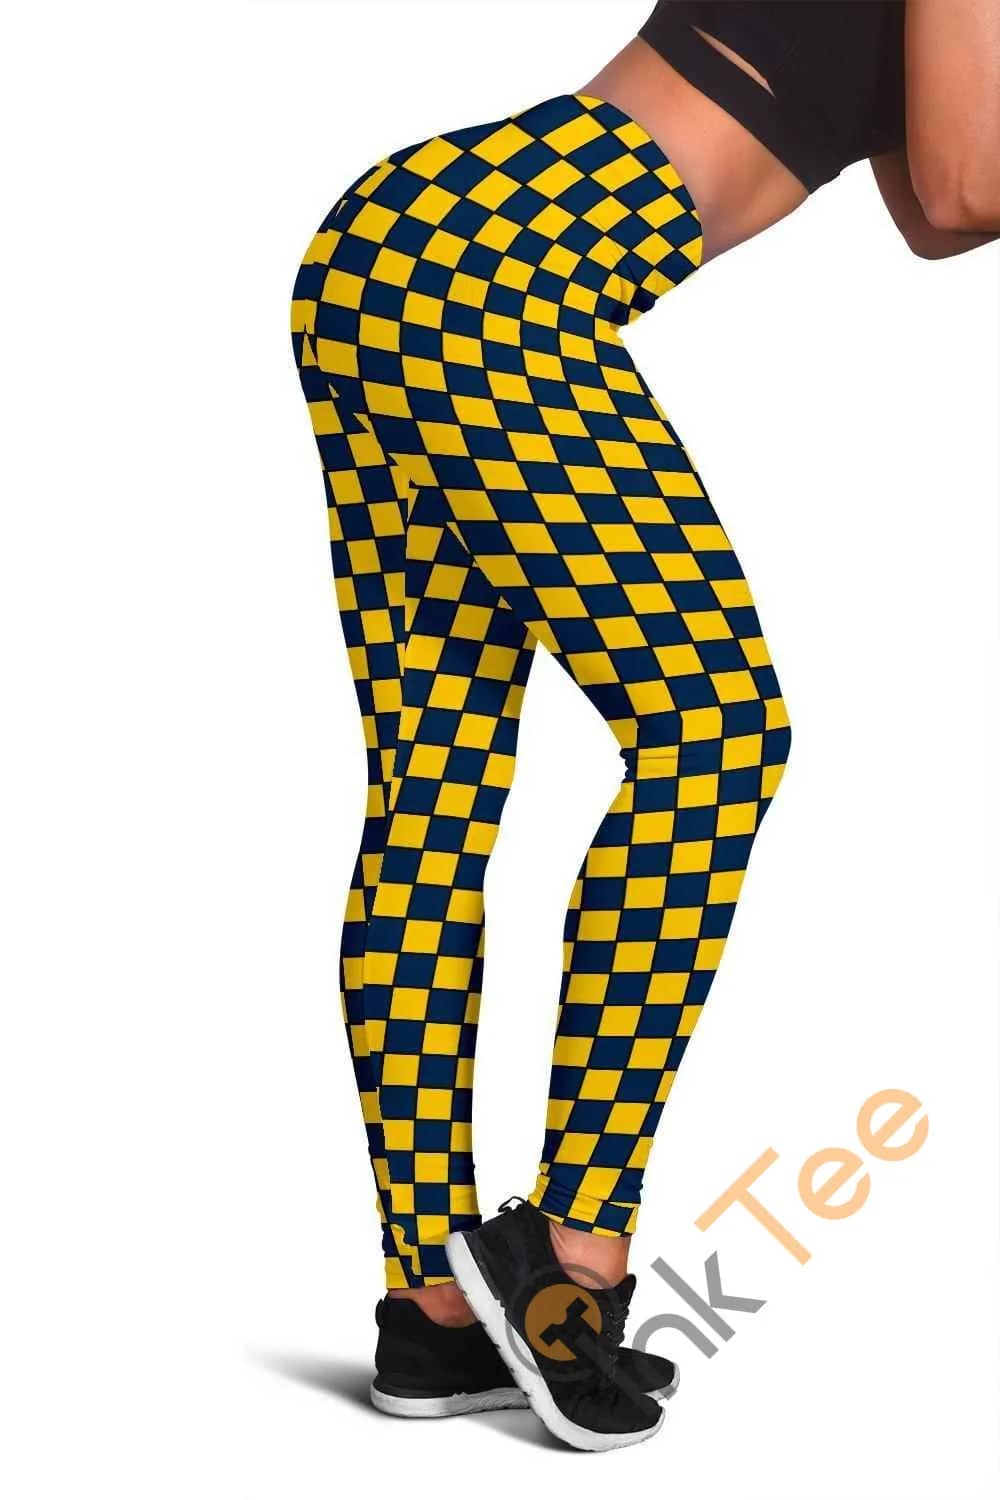 Michigan Wolverines Fan Inspired 3D All Over Print For Yoga Fitness Checkers Women'S Leggings